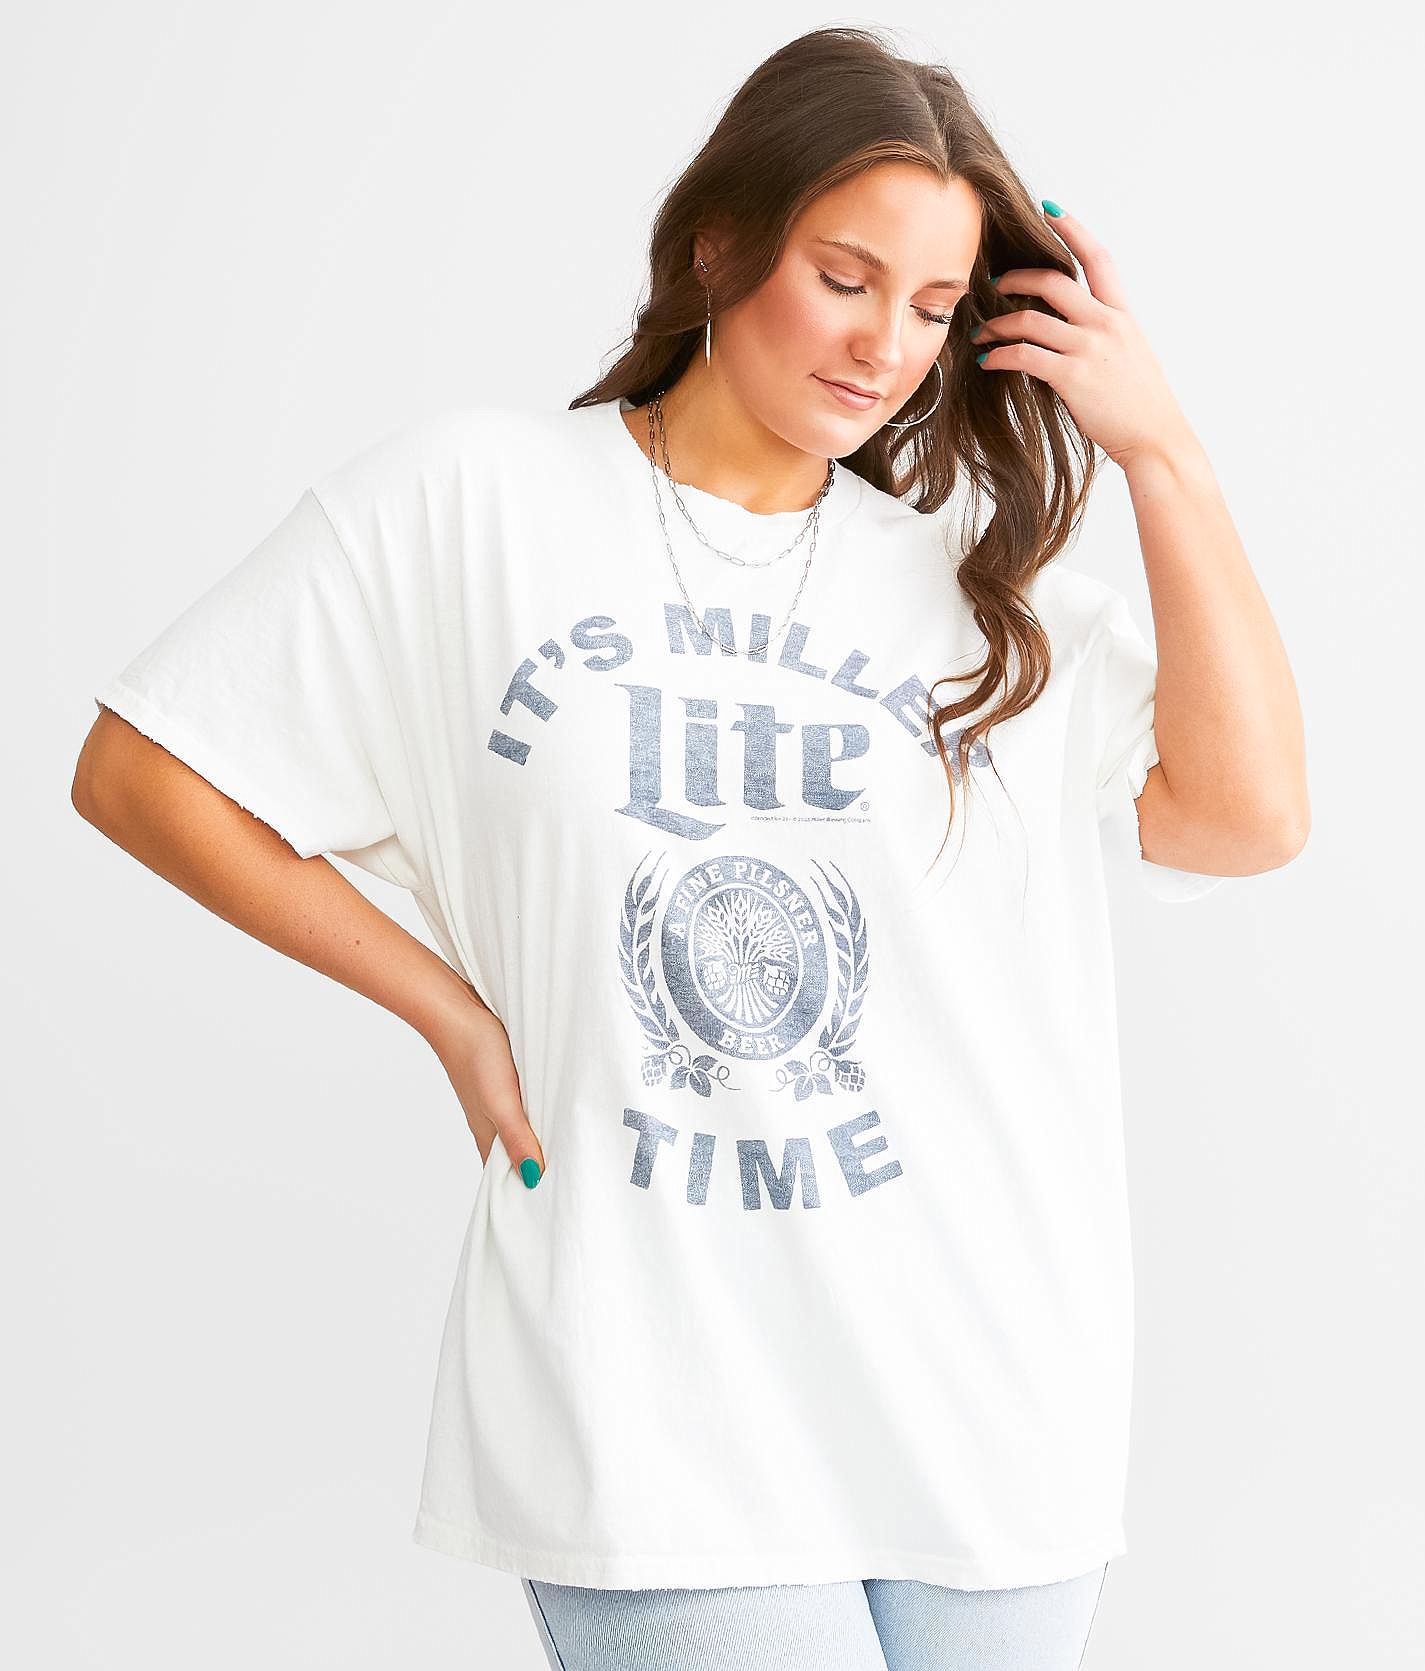 Junkfood Miller Lite® Famous Beer T-Shirt - Women's T-Shirts in White